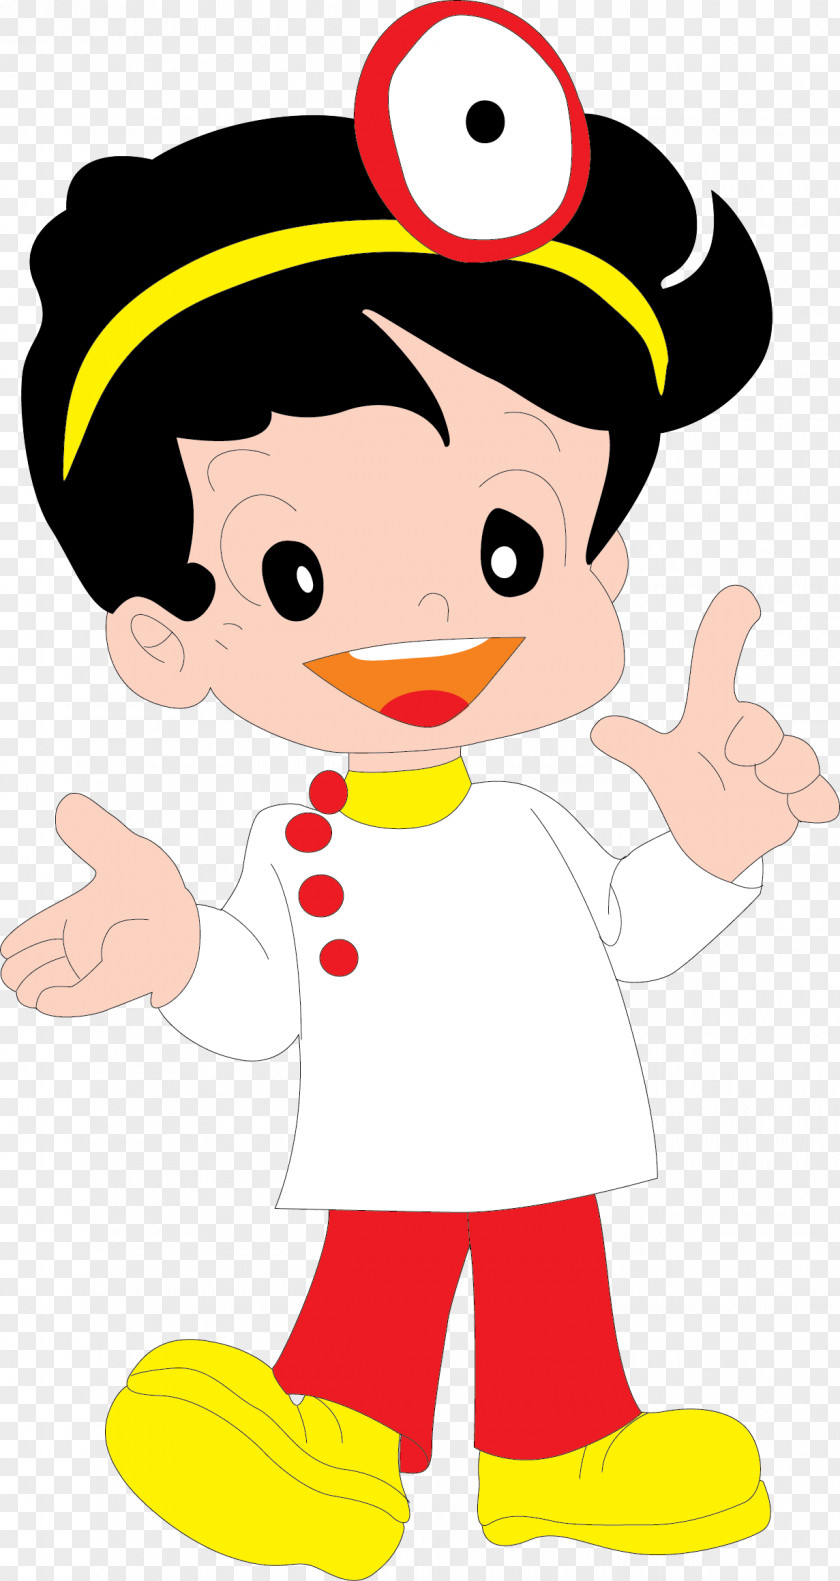 Cute Doctor Physician Health Care Clip Art PNG